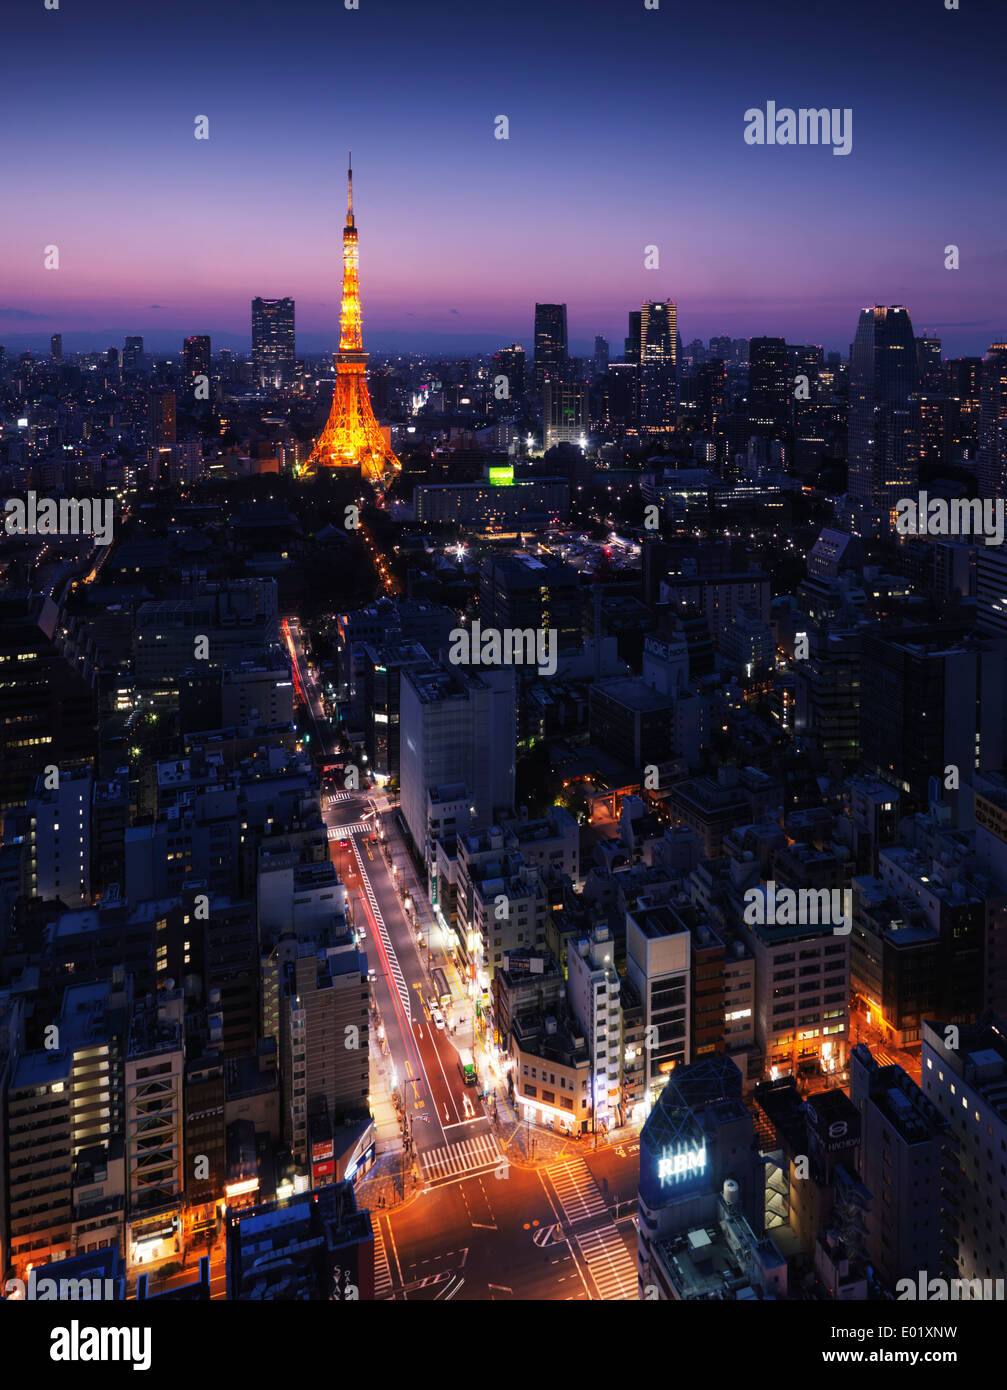 License available at MaximImages.com - Brightly lit Tokyo tower illuminated at nighttime in cityscape with colorful twilight skies. Tokyo, Japan Stock Photo